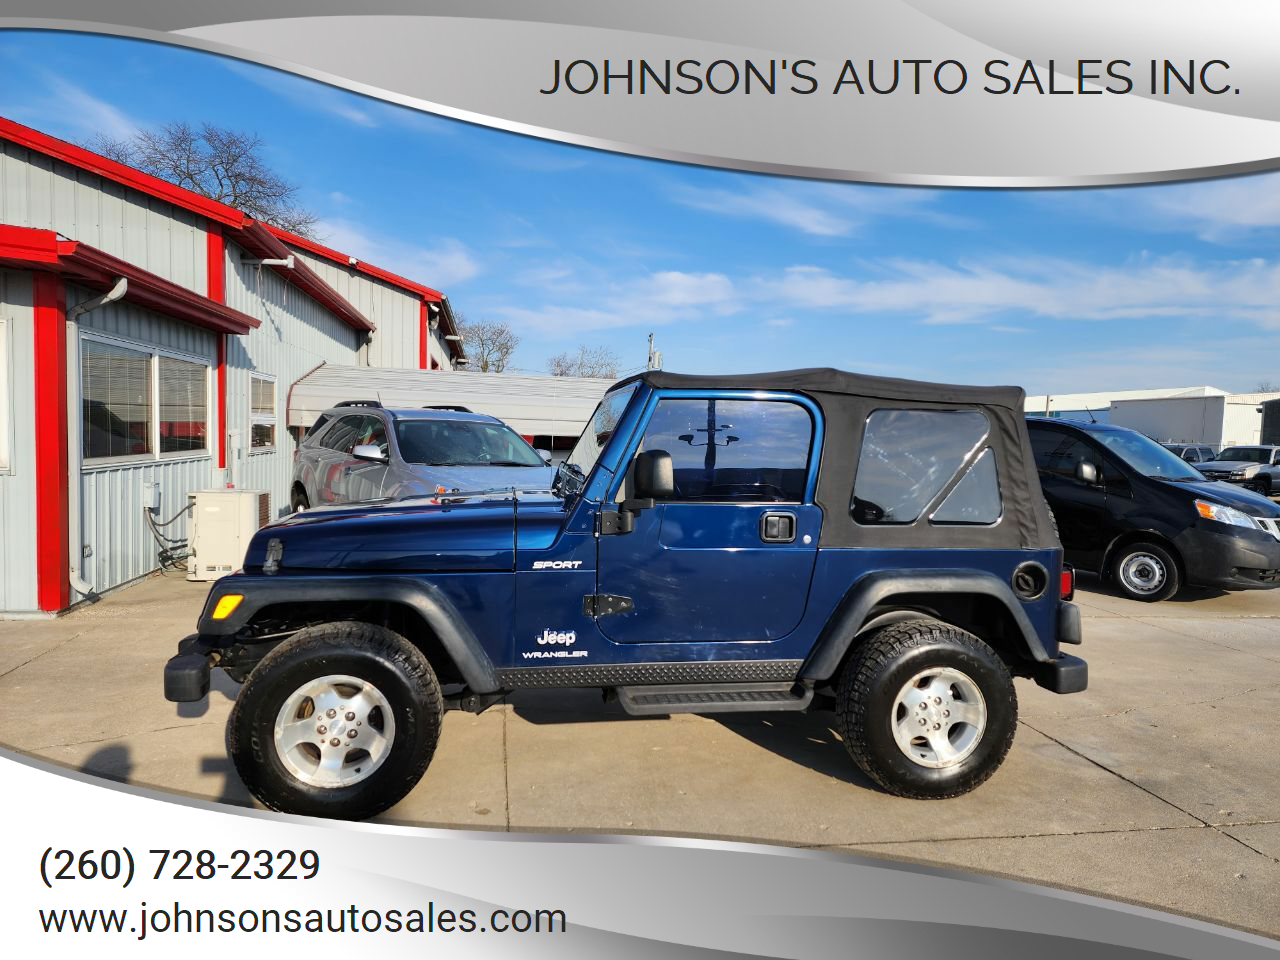 2003 Jeep Wrangler For Sale In Indiana ®